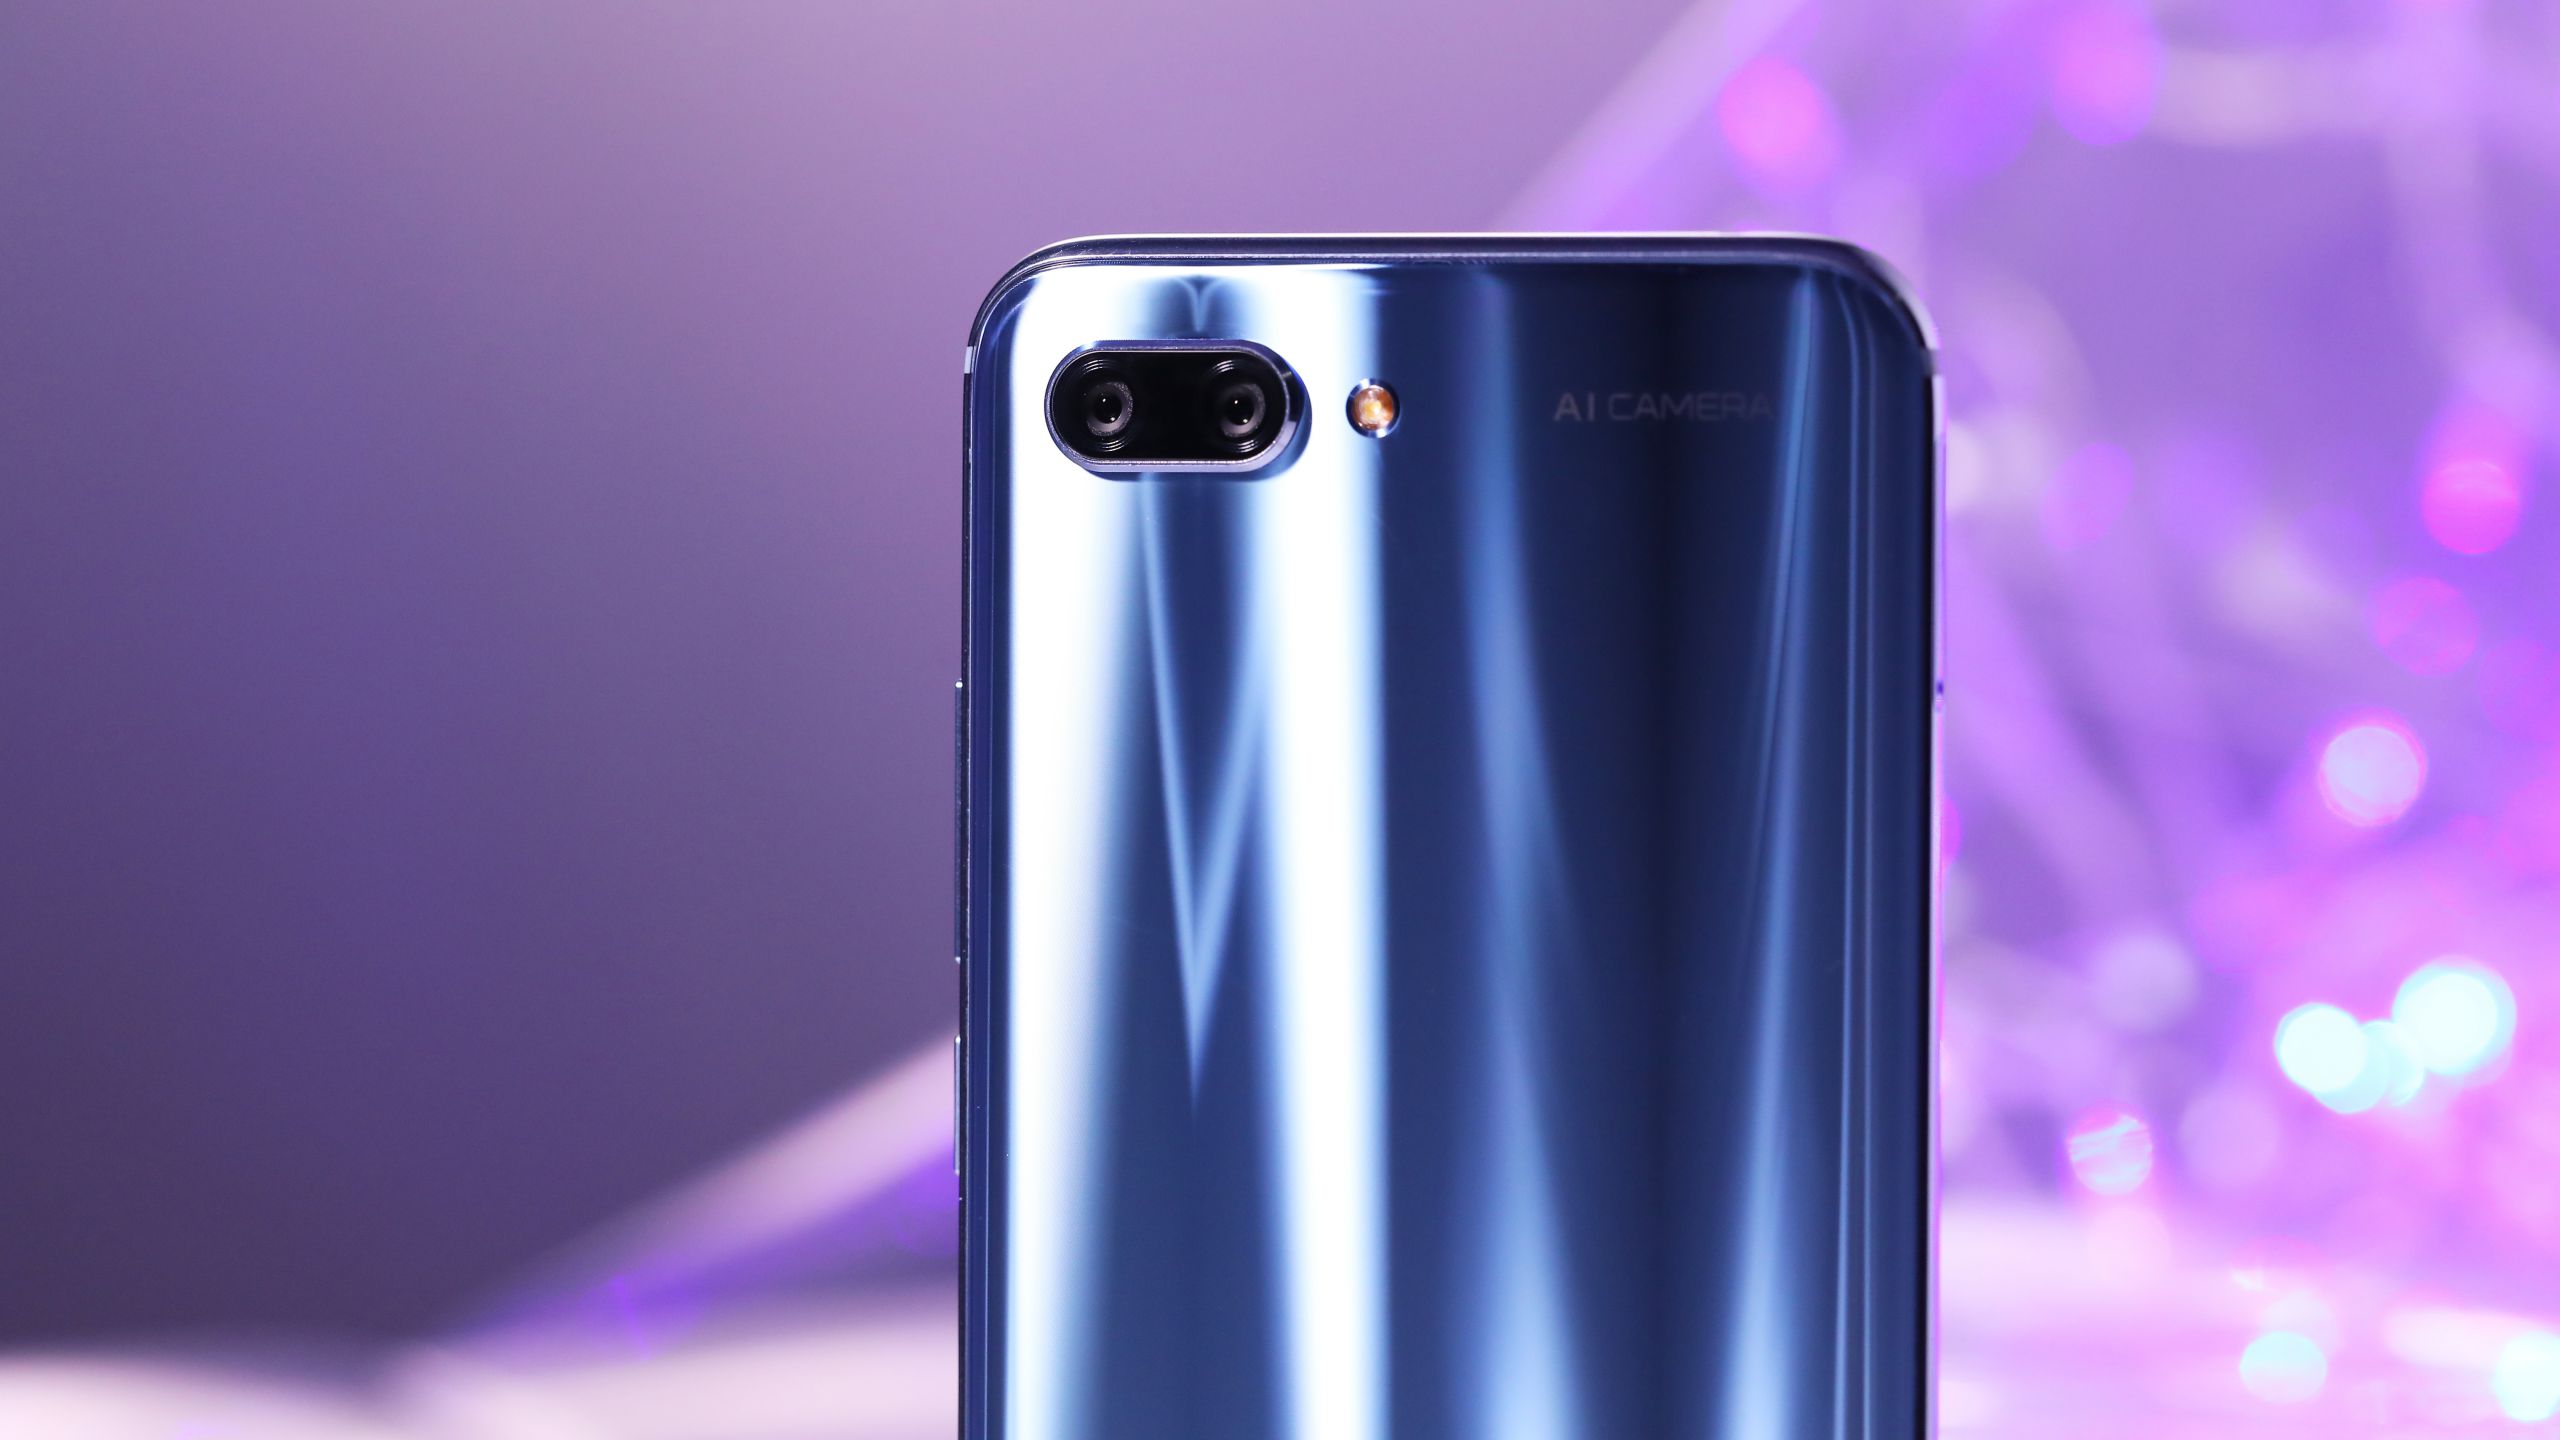 The Honor 10i smartphone is the European version of the popular Honor 10 flagship